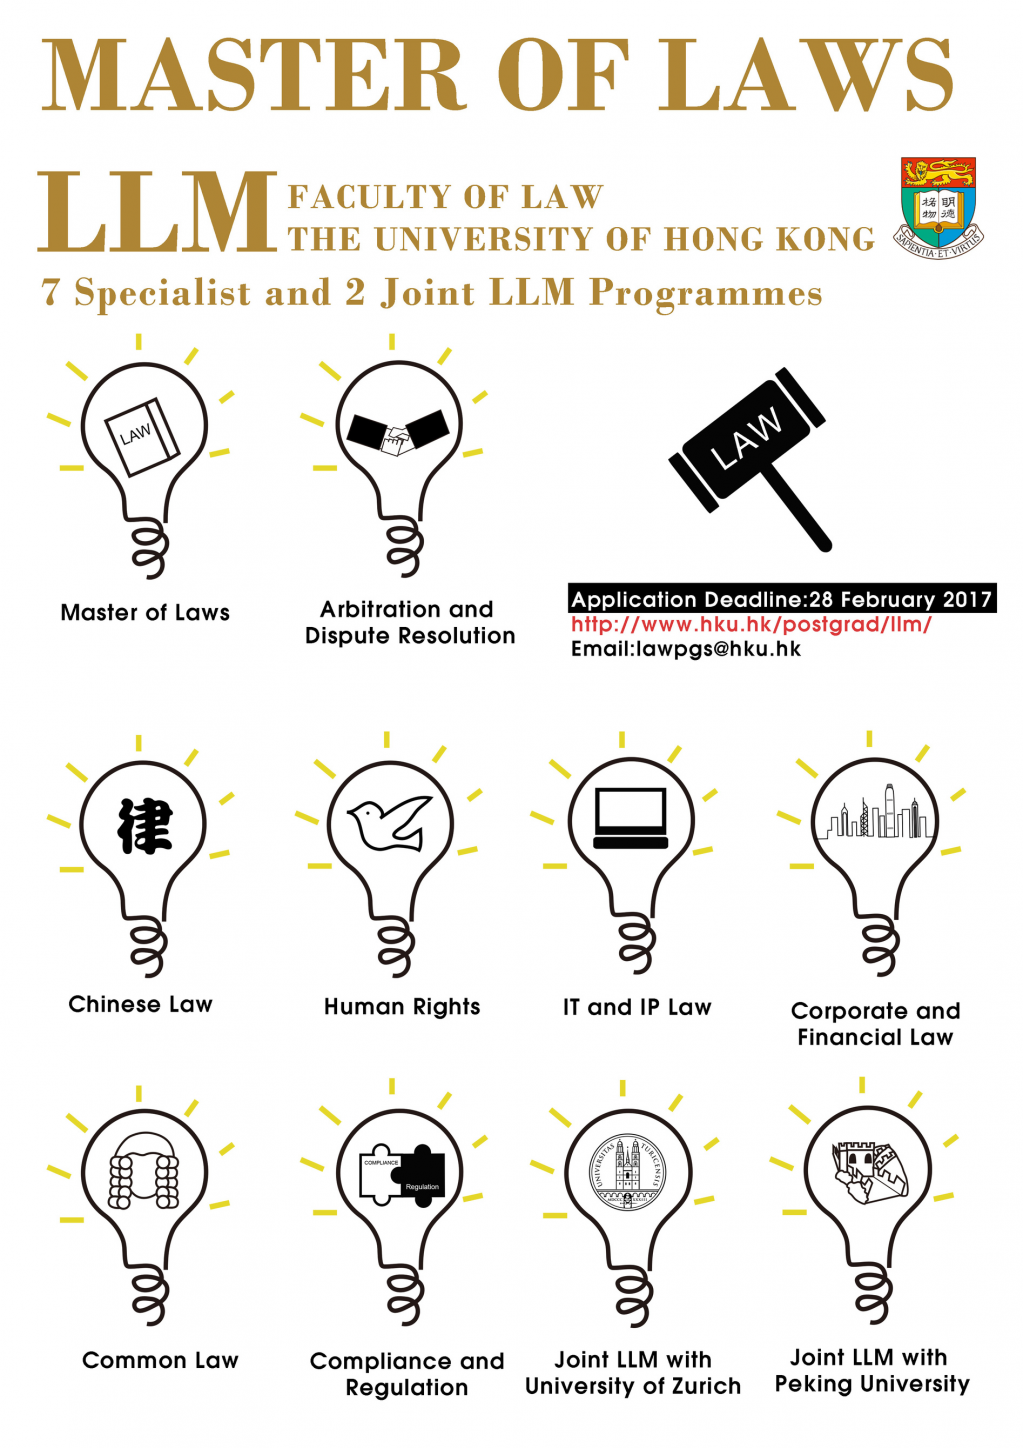 [Apply Now] HKU Master of Laws - 7 Specialist and 2 Joint LLM Programmes